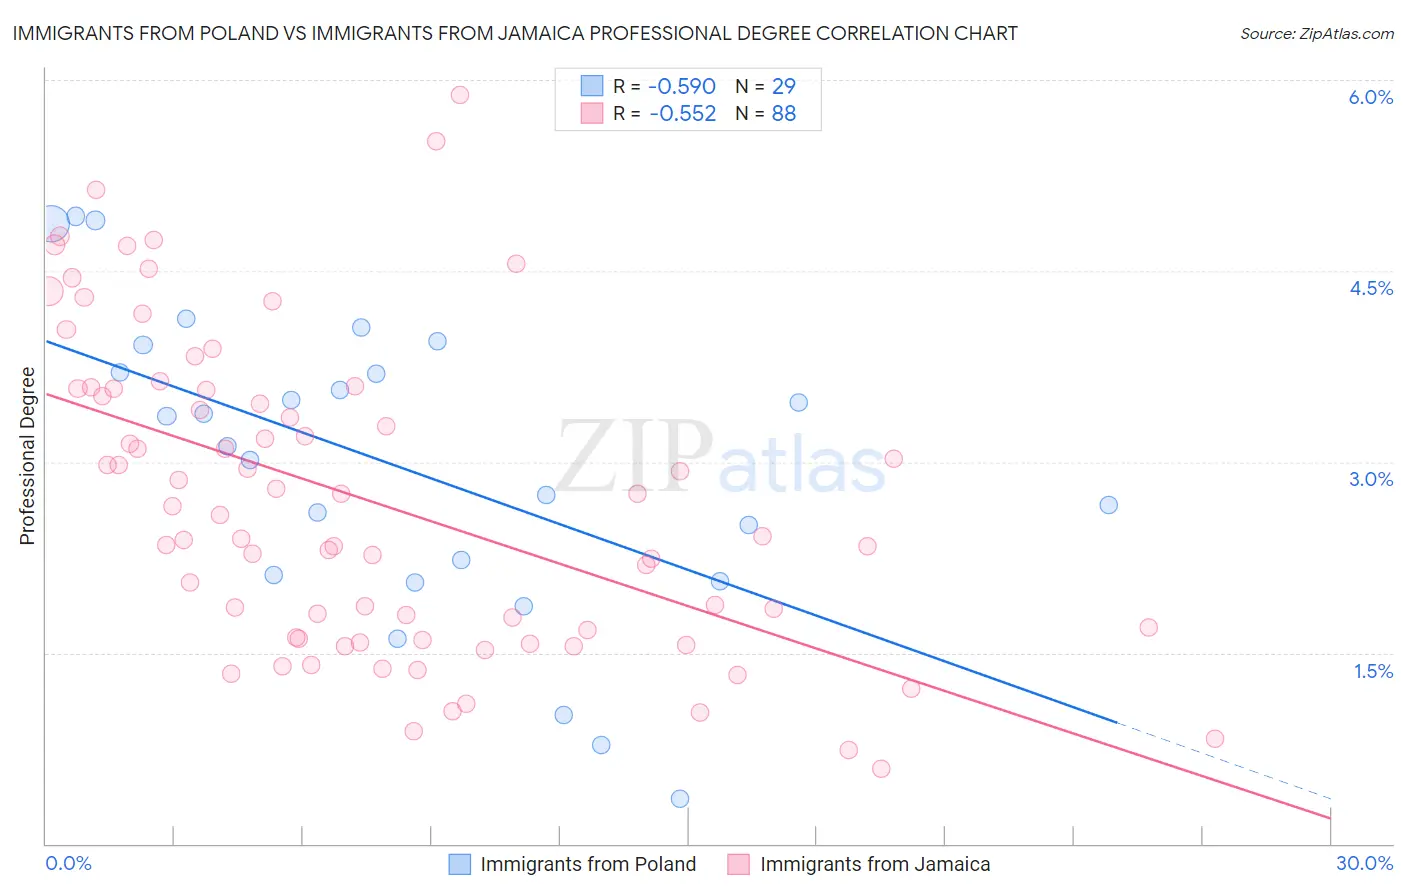 Immigrants from Poland vs Immigrants from Jamaica Professional Degree